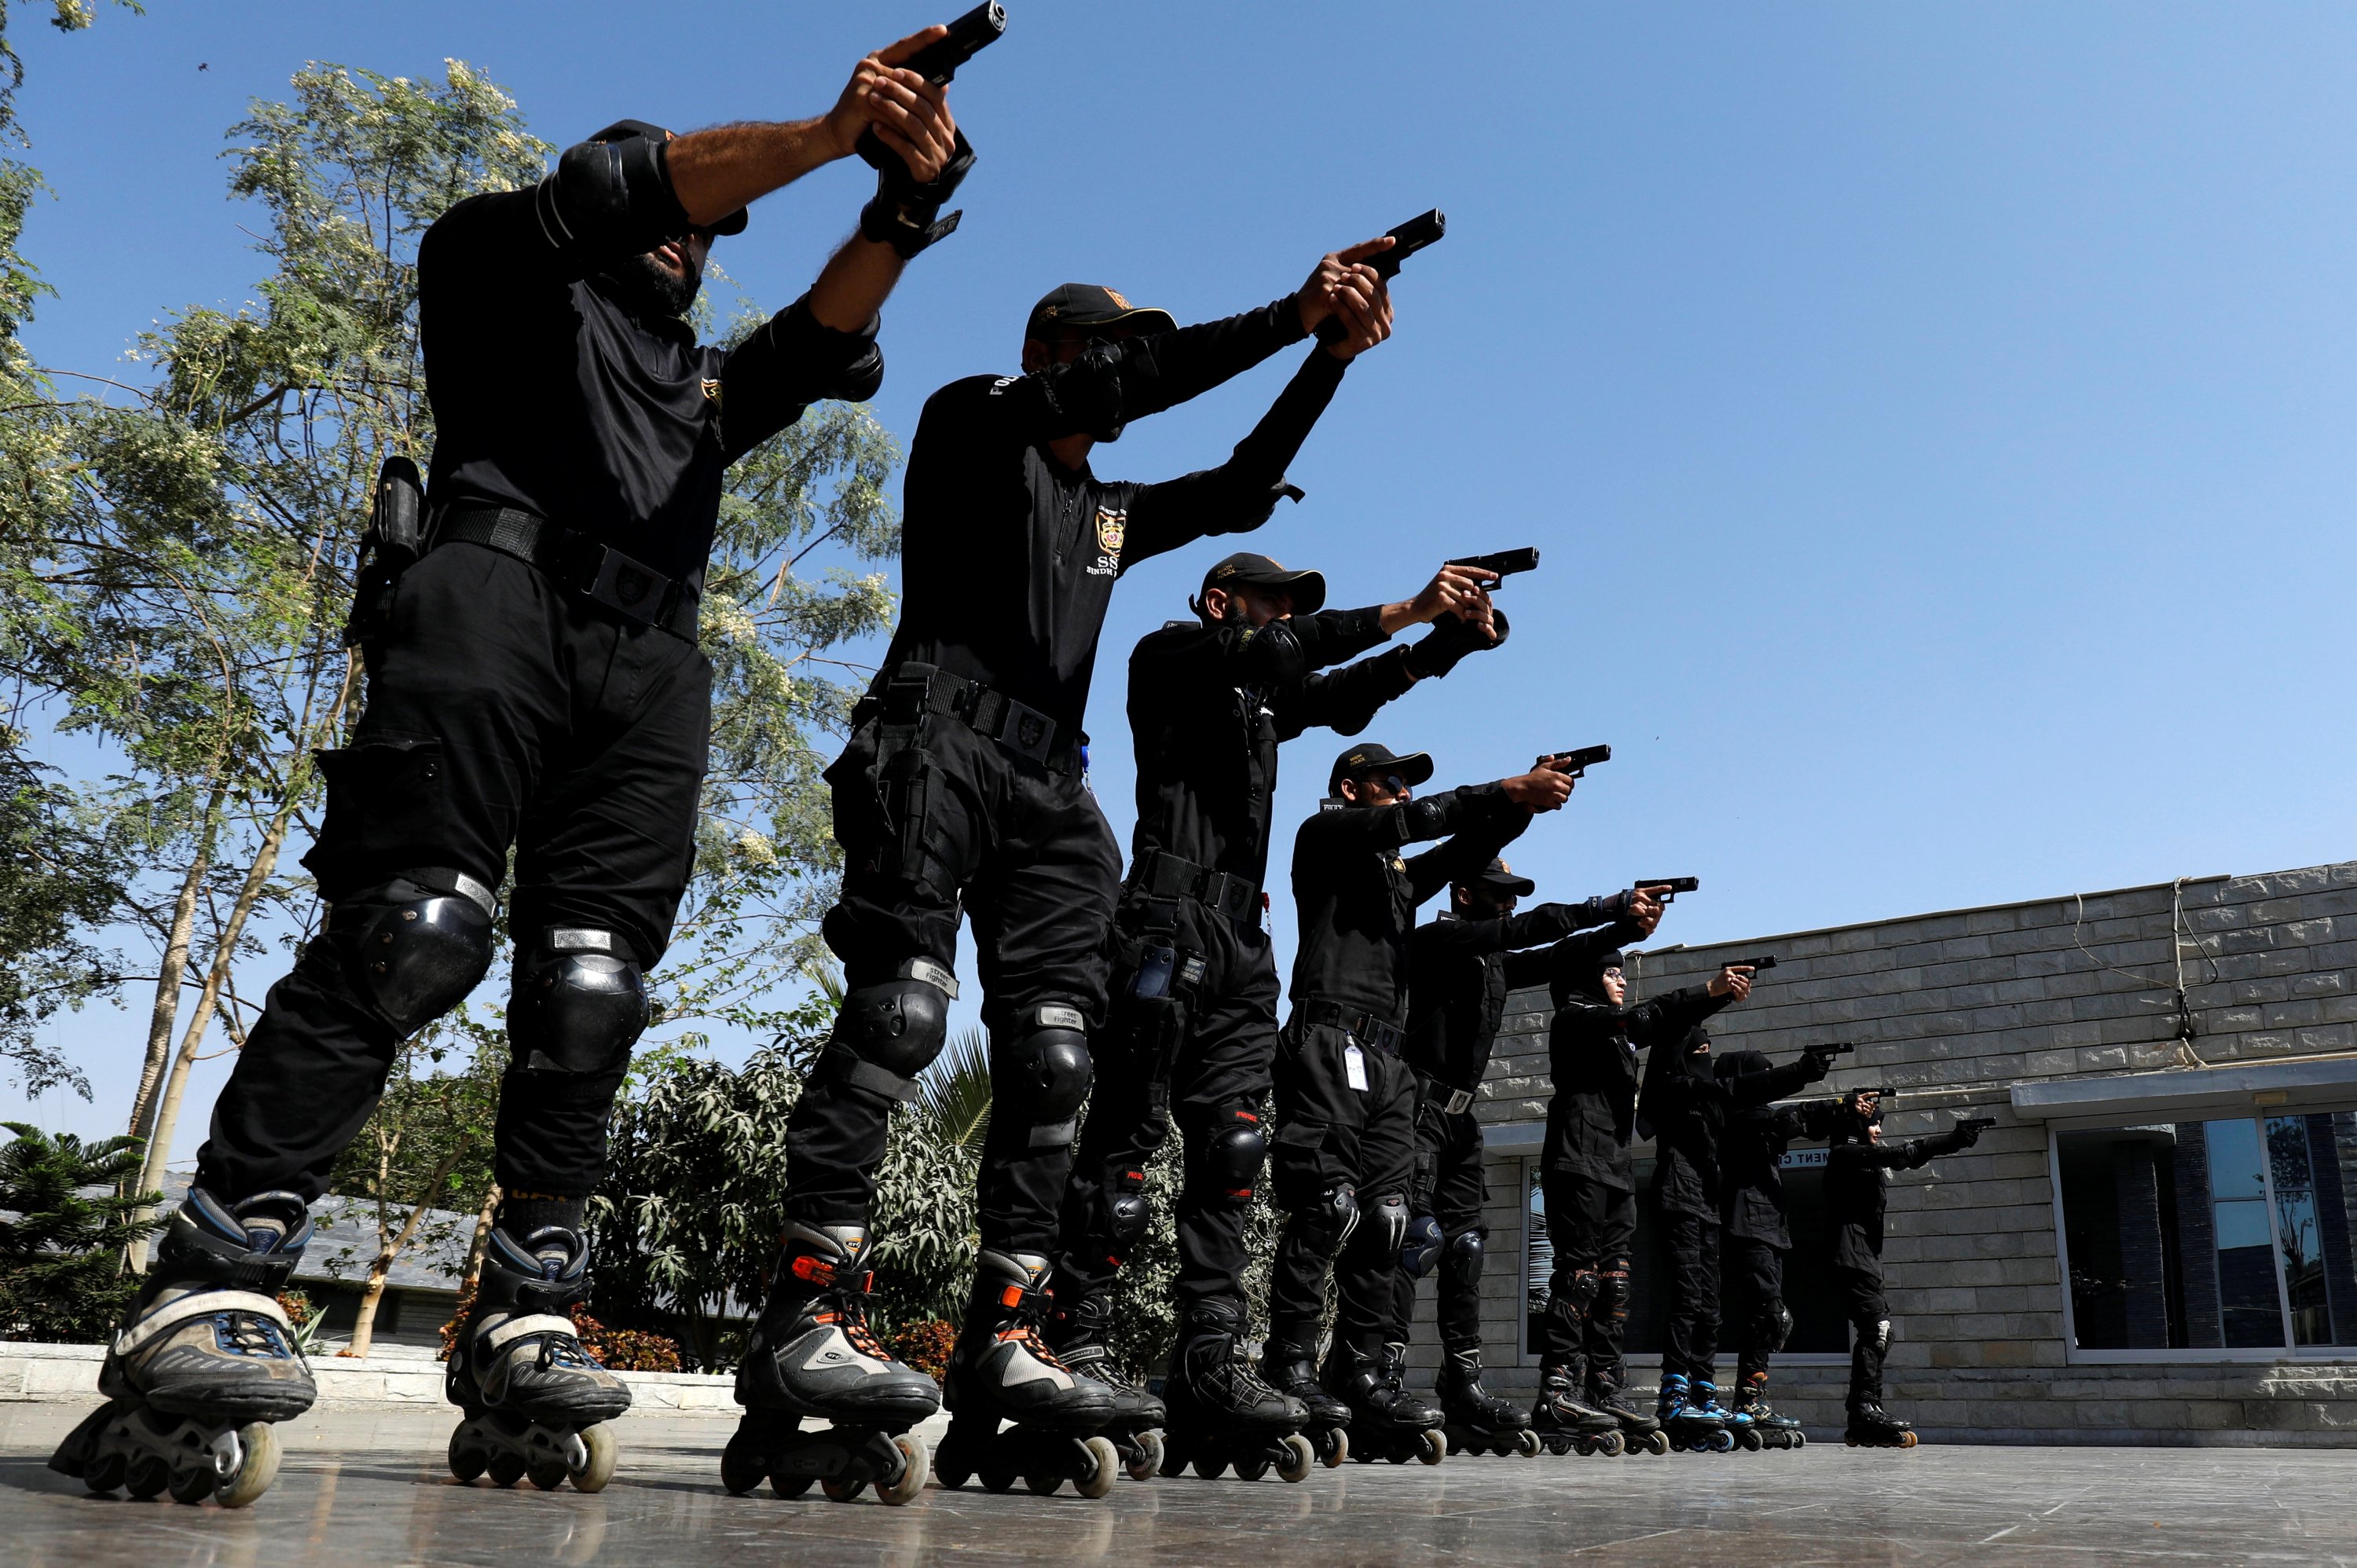 Special Security Unit (SSU) police members aim their weapons as they rollerblade during practice at the headquarters in Karachi, Pakistan, Feb. 18, 2021. (Reuters Photo)